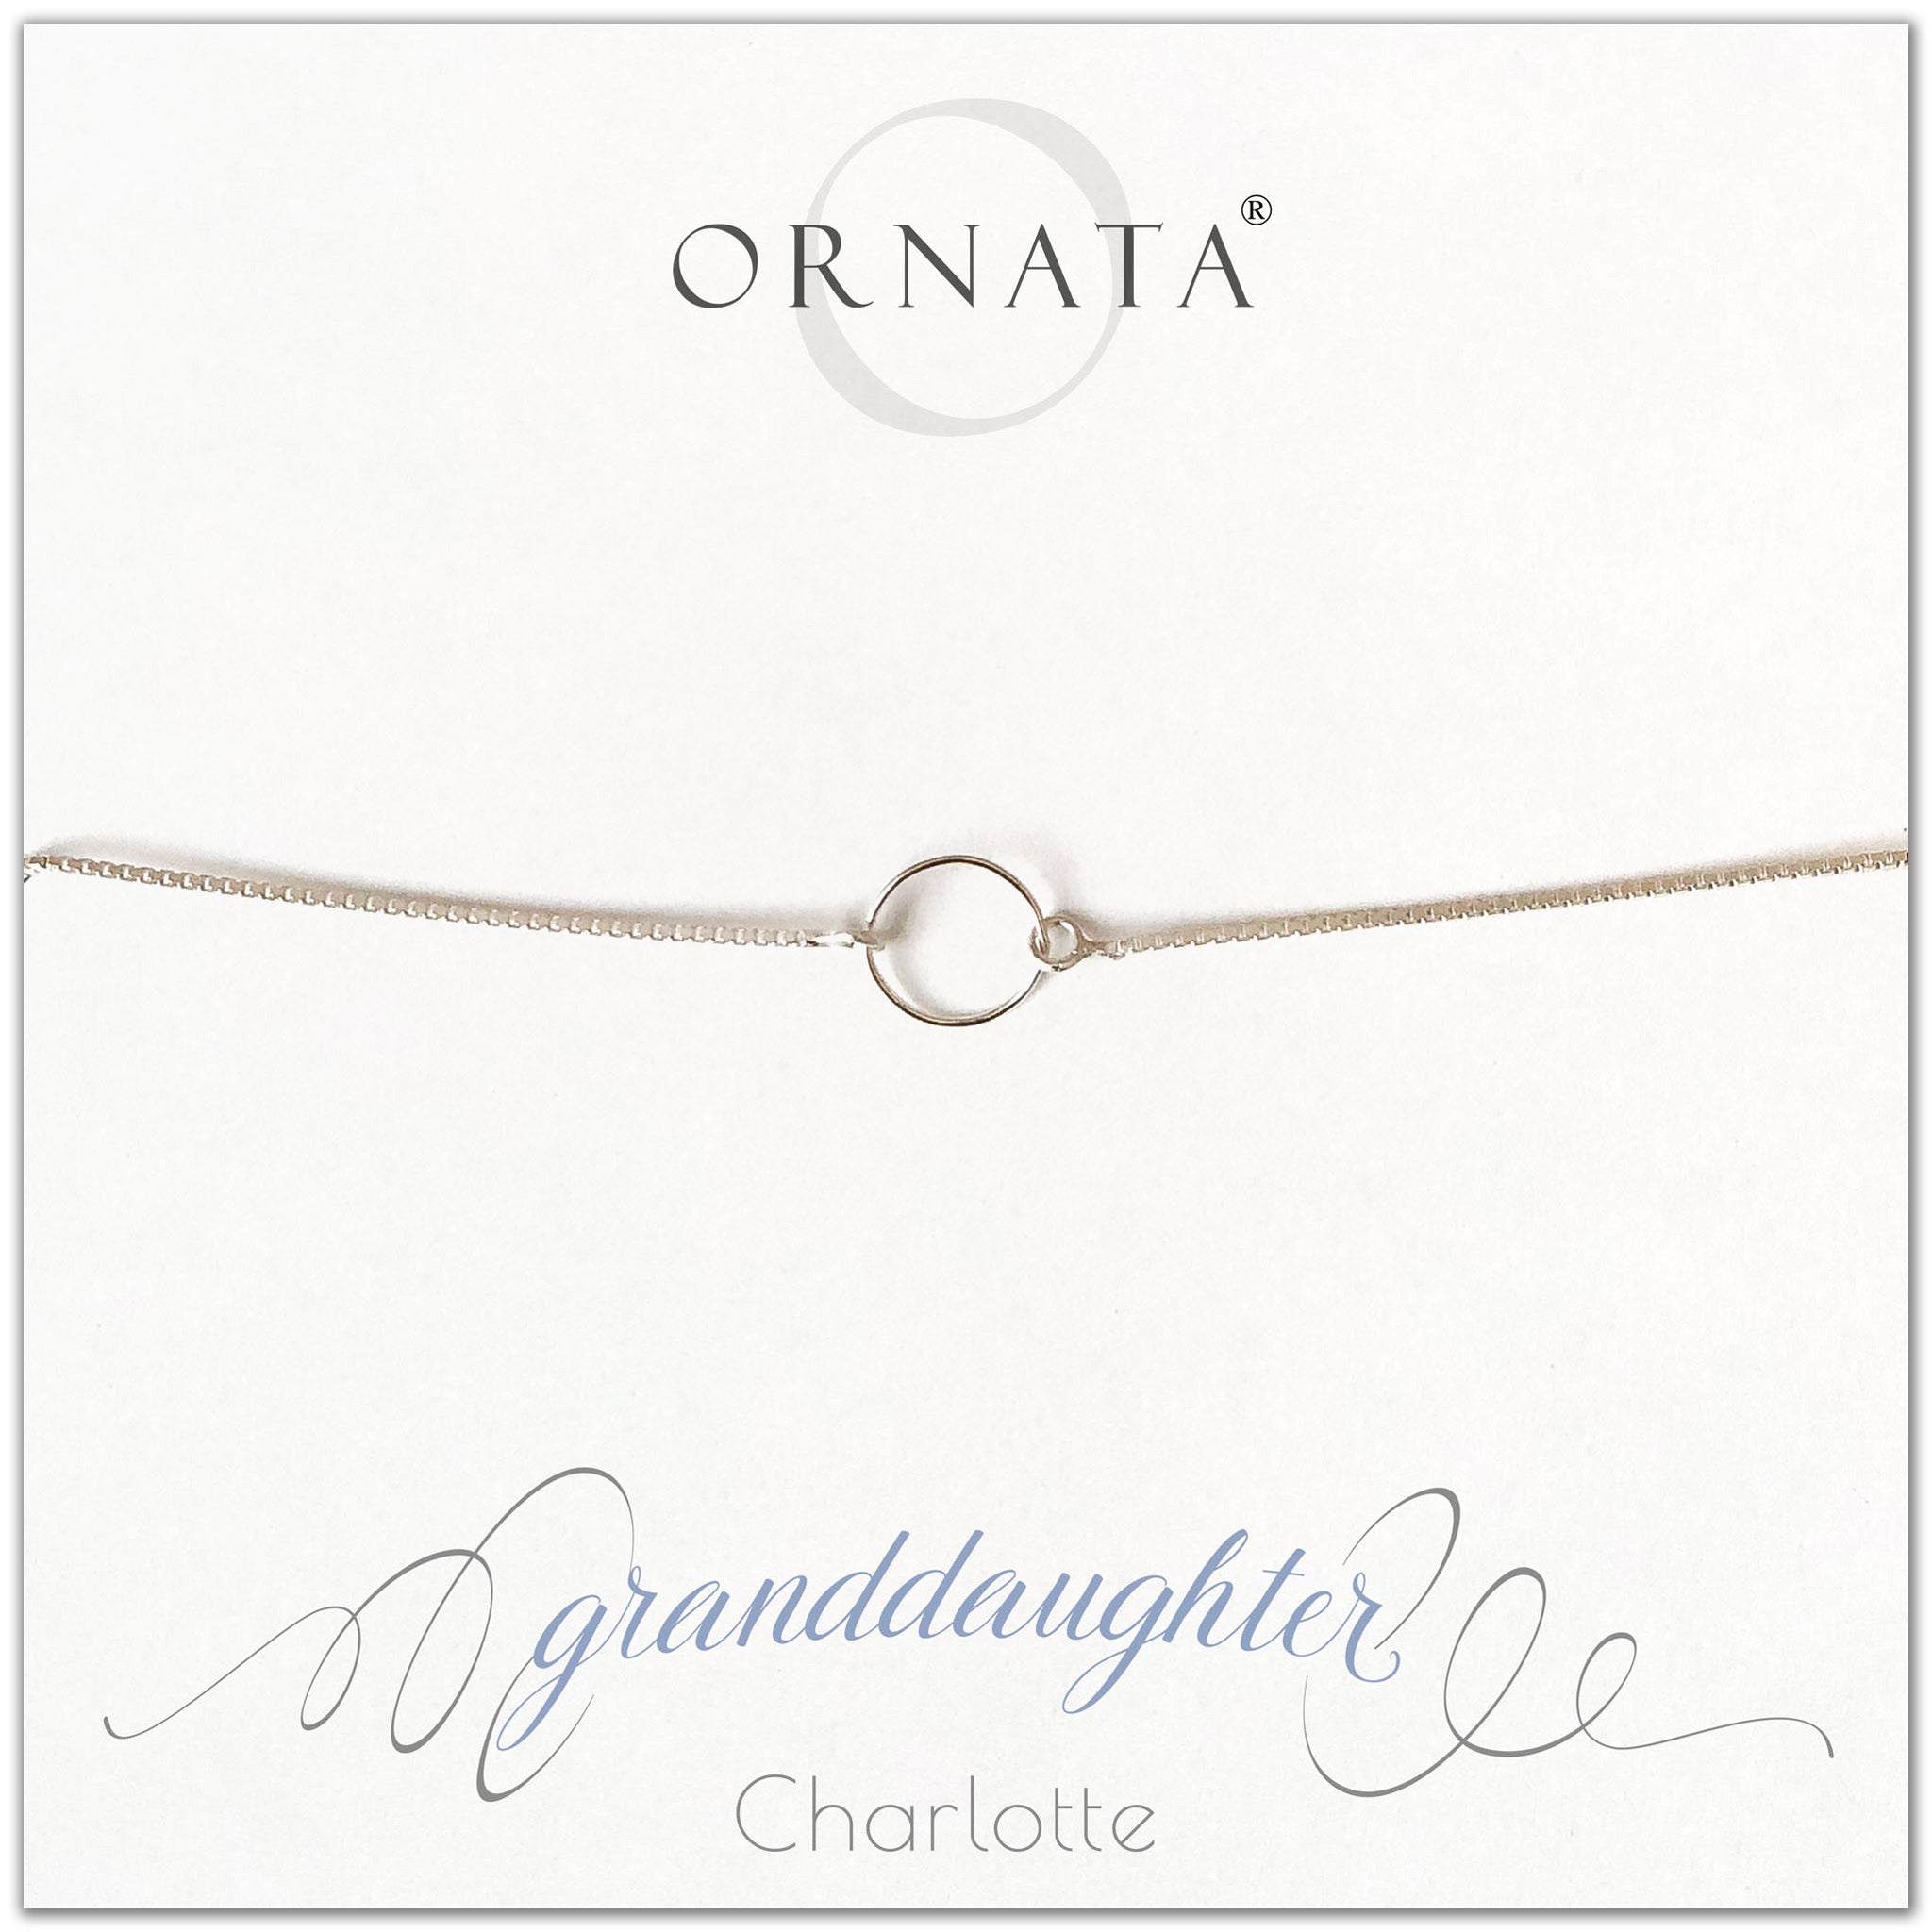 Granddaughter personalized sterling silver bolo bracelet. Our custom bracelets make good gifts for grandmother to give their granddaughters. Great granddaughter gift.